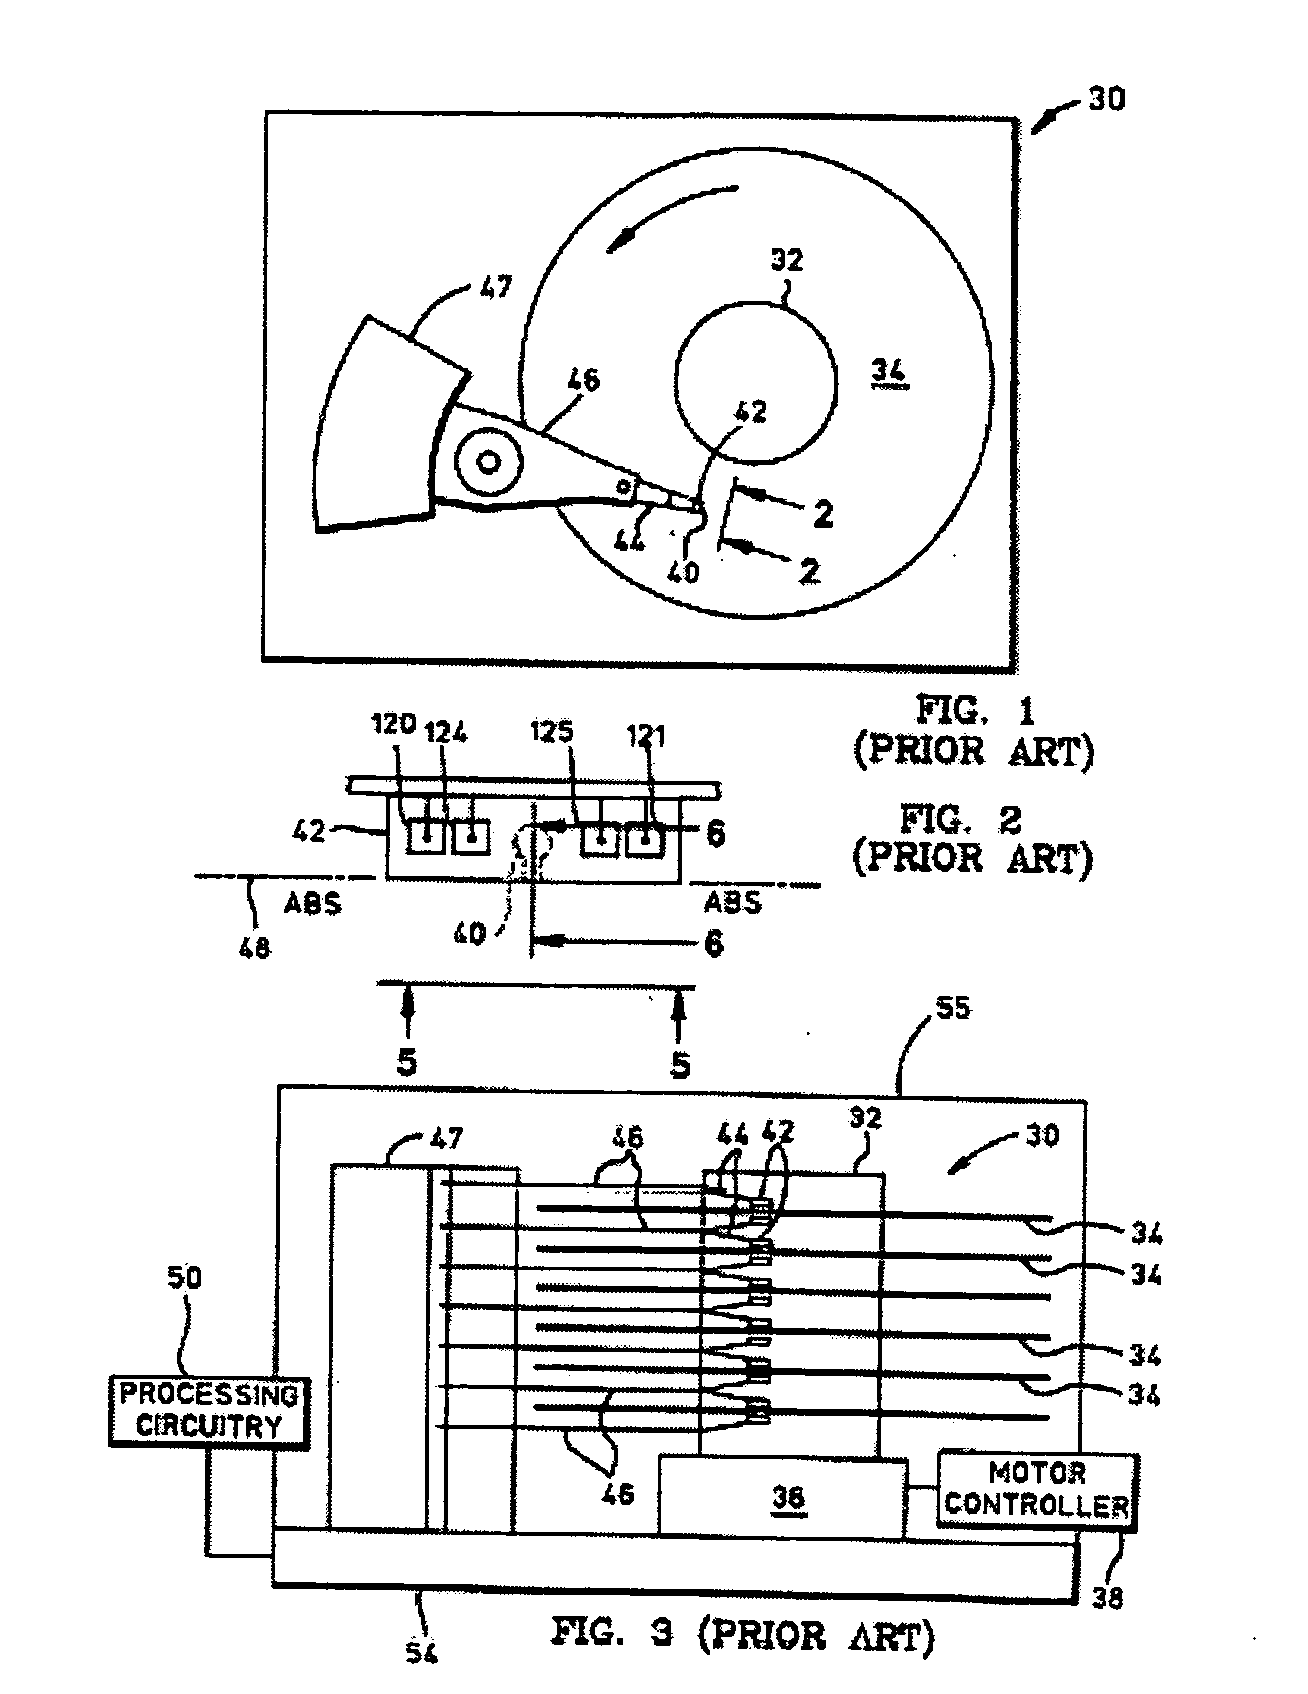 Perpendicular recording magnetic head with a write shield magnetically coupled to a first pole piece